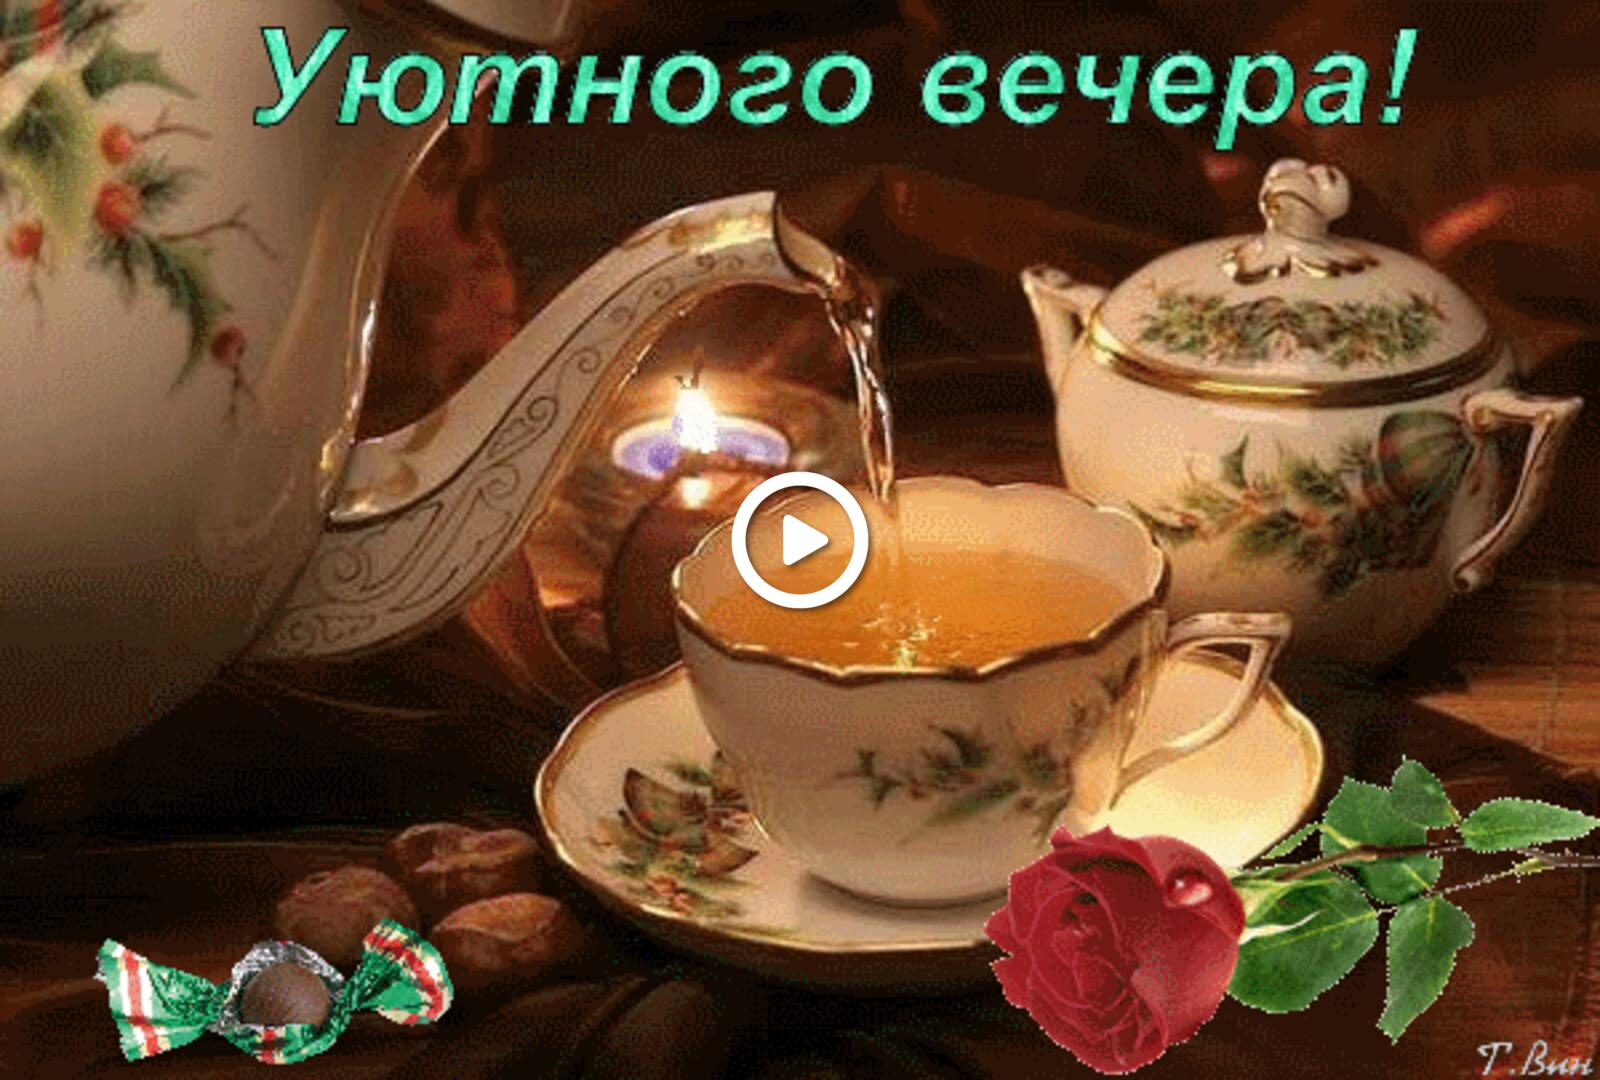 afternoon tea have a nice cozy evening cozy evening gifs